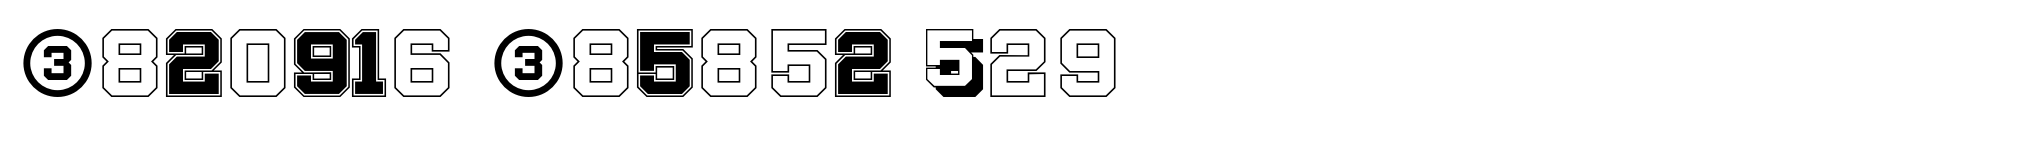 Display Digits Two image